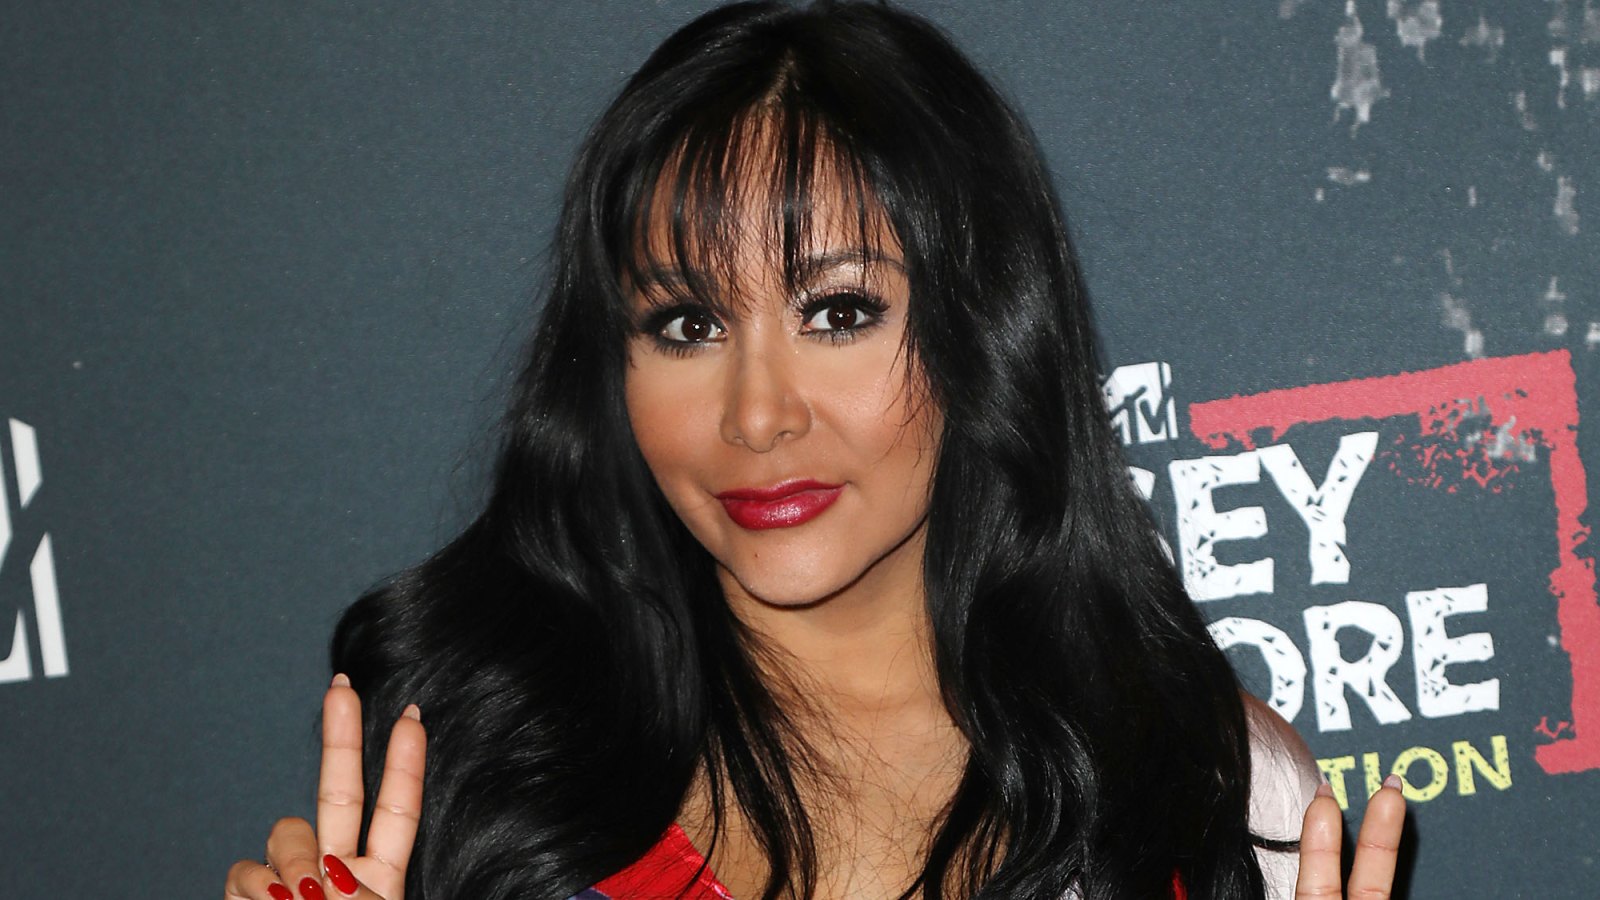 Nicole ‘Snooki’ Polizzi Posts About ‘A New Chapter’ After Quitting ‘Jersey Shore’